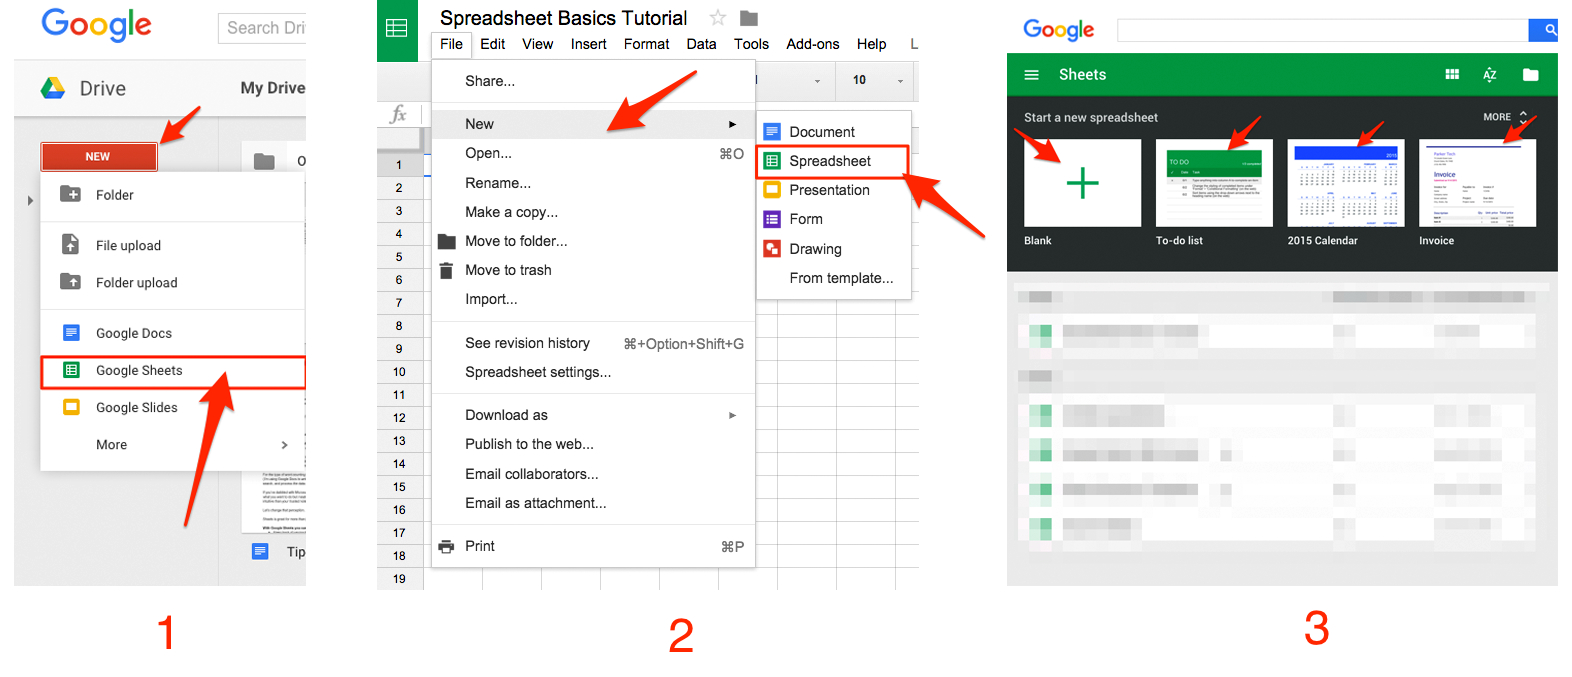 Google Spreadsheet Excel Throughout Google Sheets 101: The Beginner's Guide To Online Spreadsheets  The